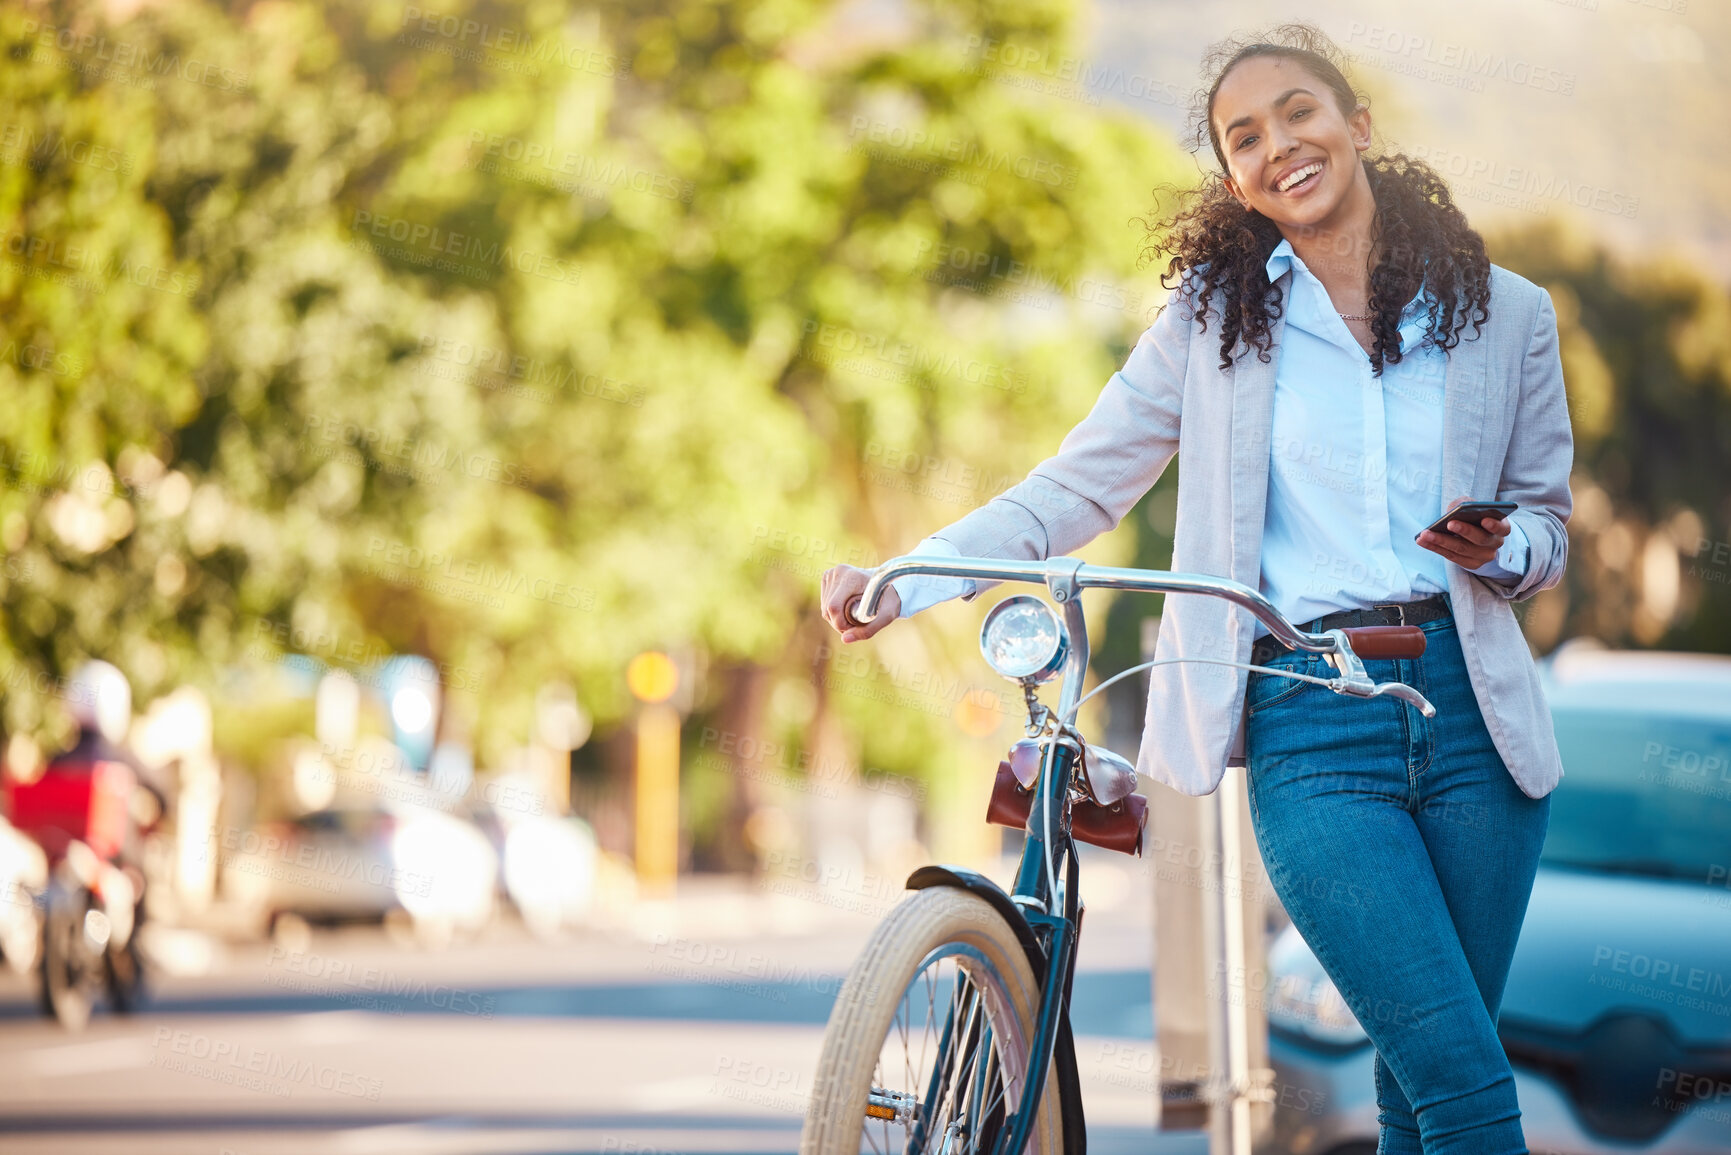 Buy stock photo Eco friendly, worker travel and bike break outside in city. Business woman commuting with bicycle to reduce carbon footprint. Sustainability person traveling with green mindset and responsibility.